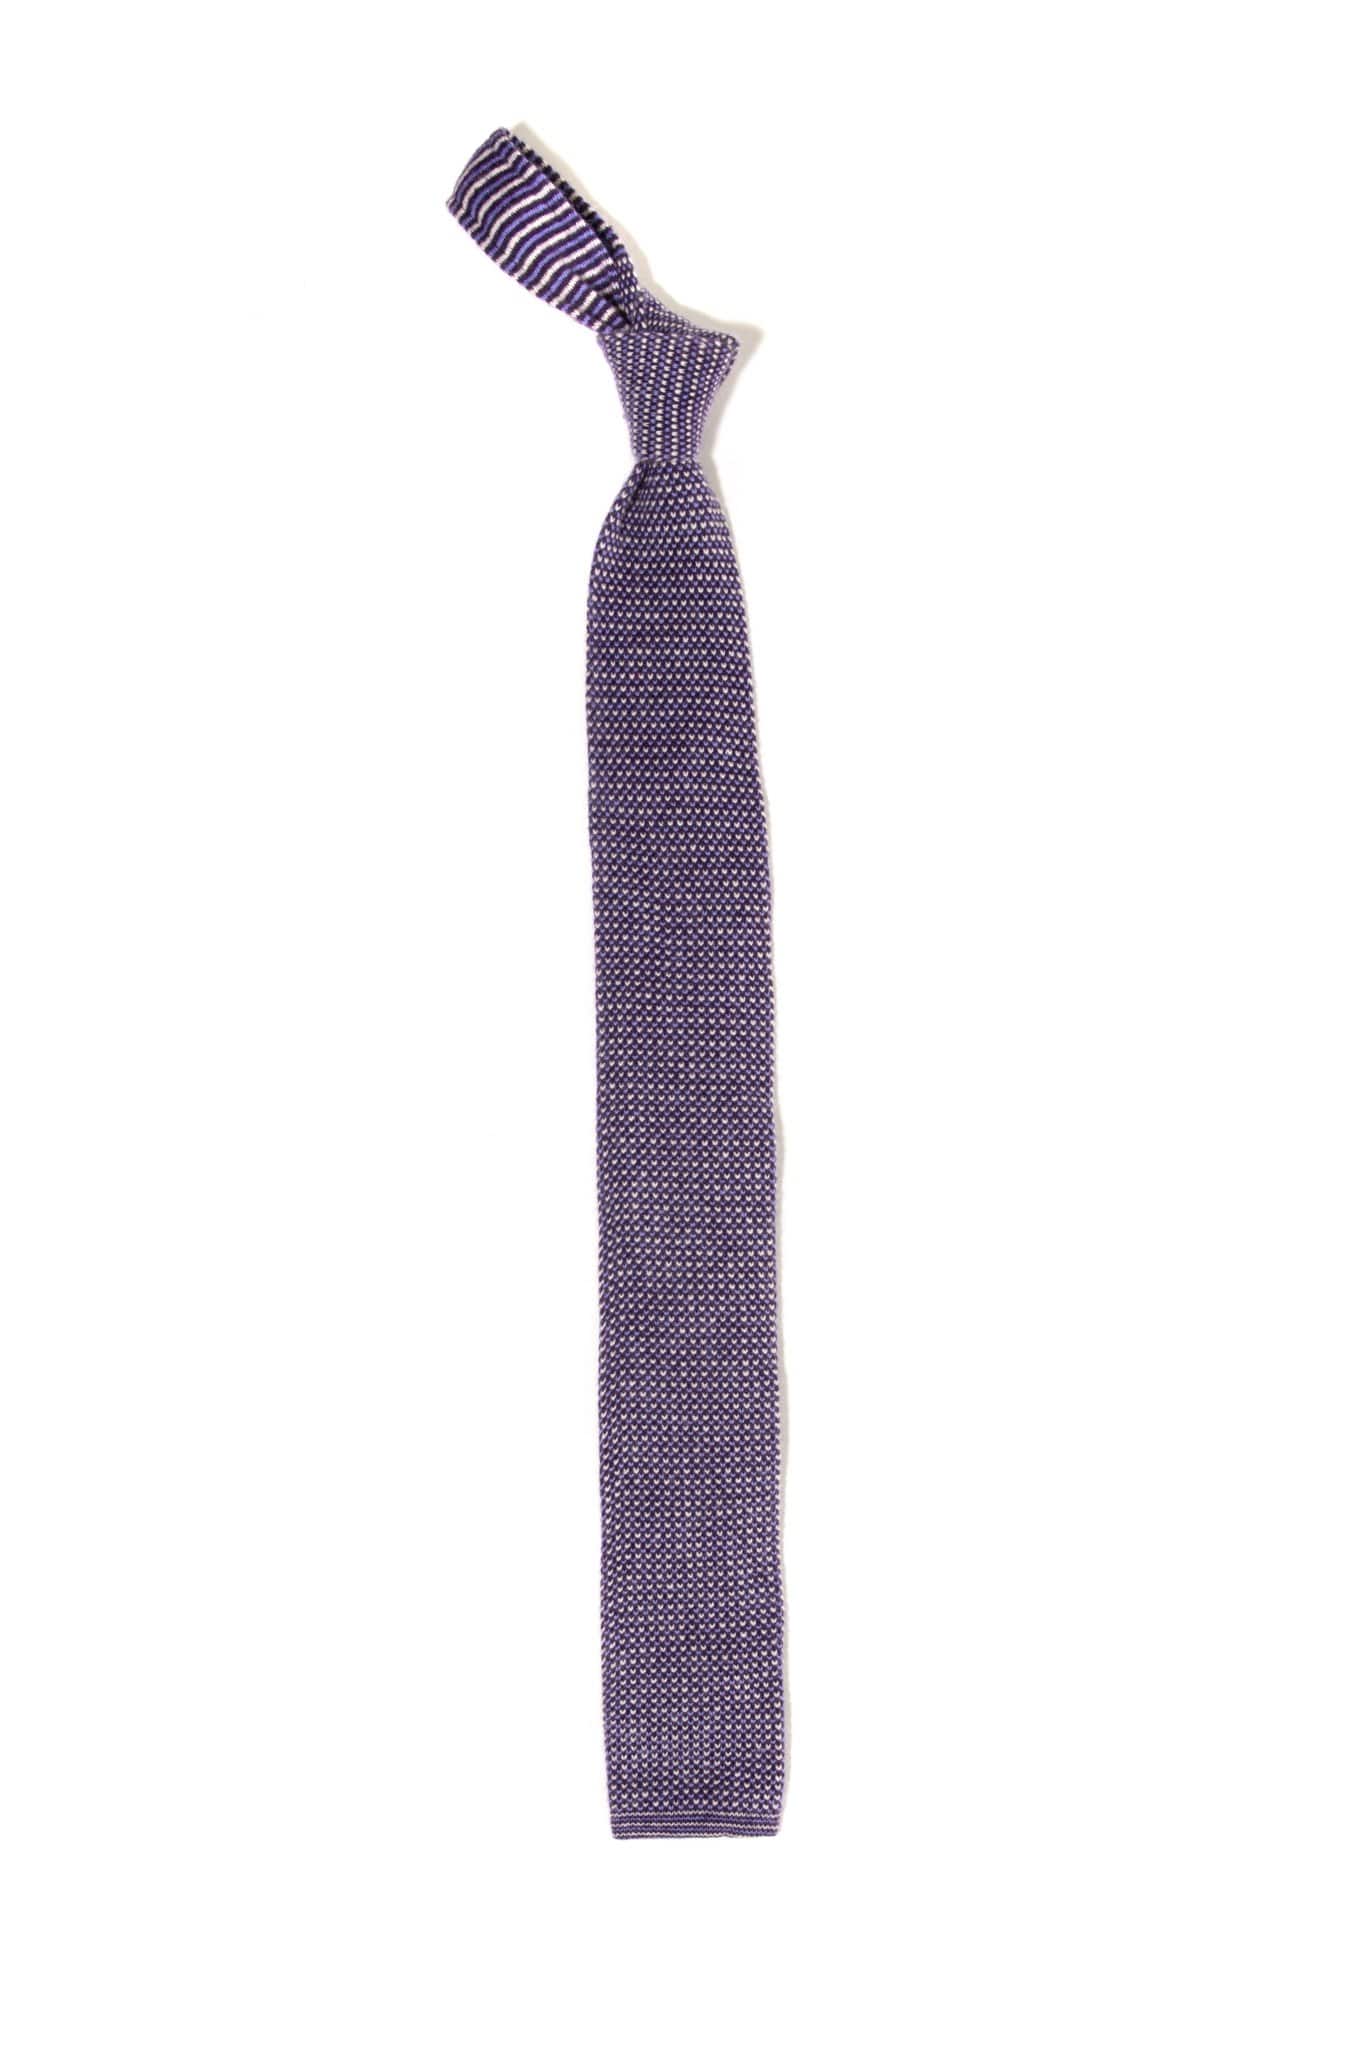 Petronius Cashmere Knitted Ties | Mens - Accessories - Ties | Petronius